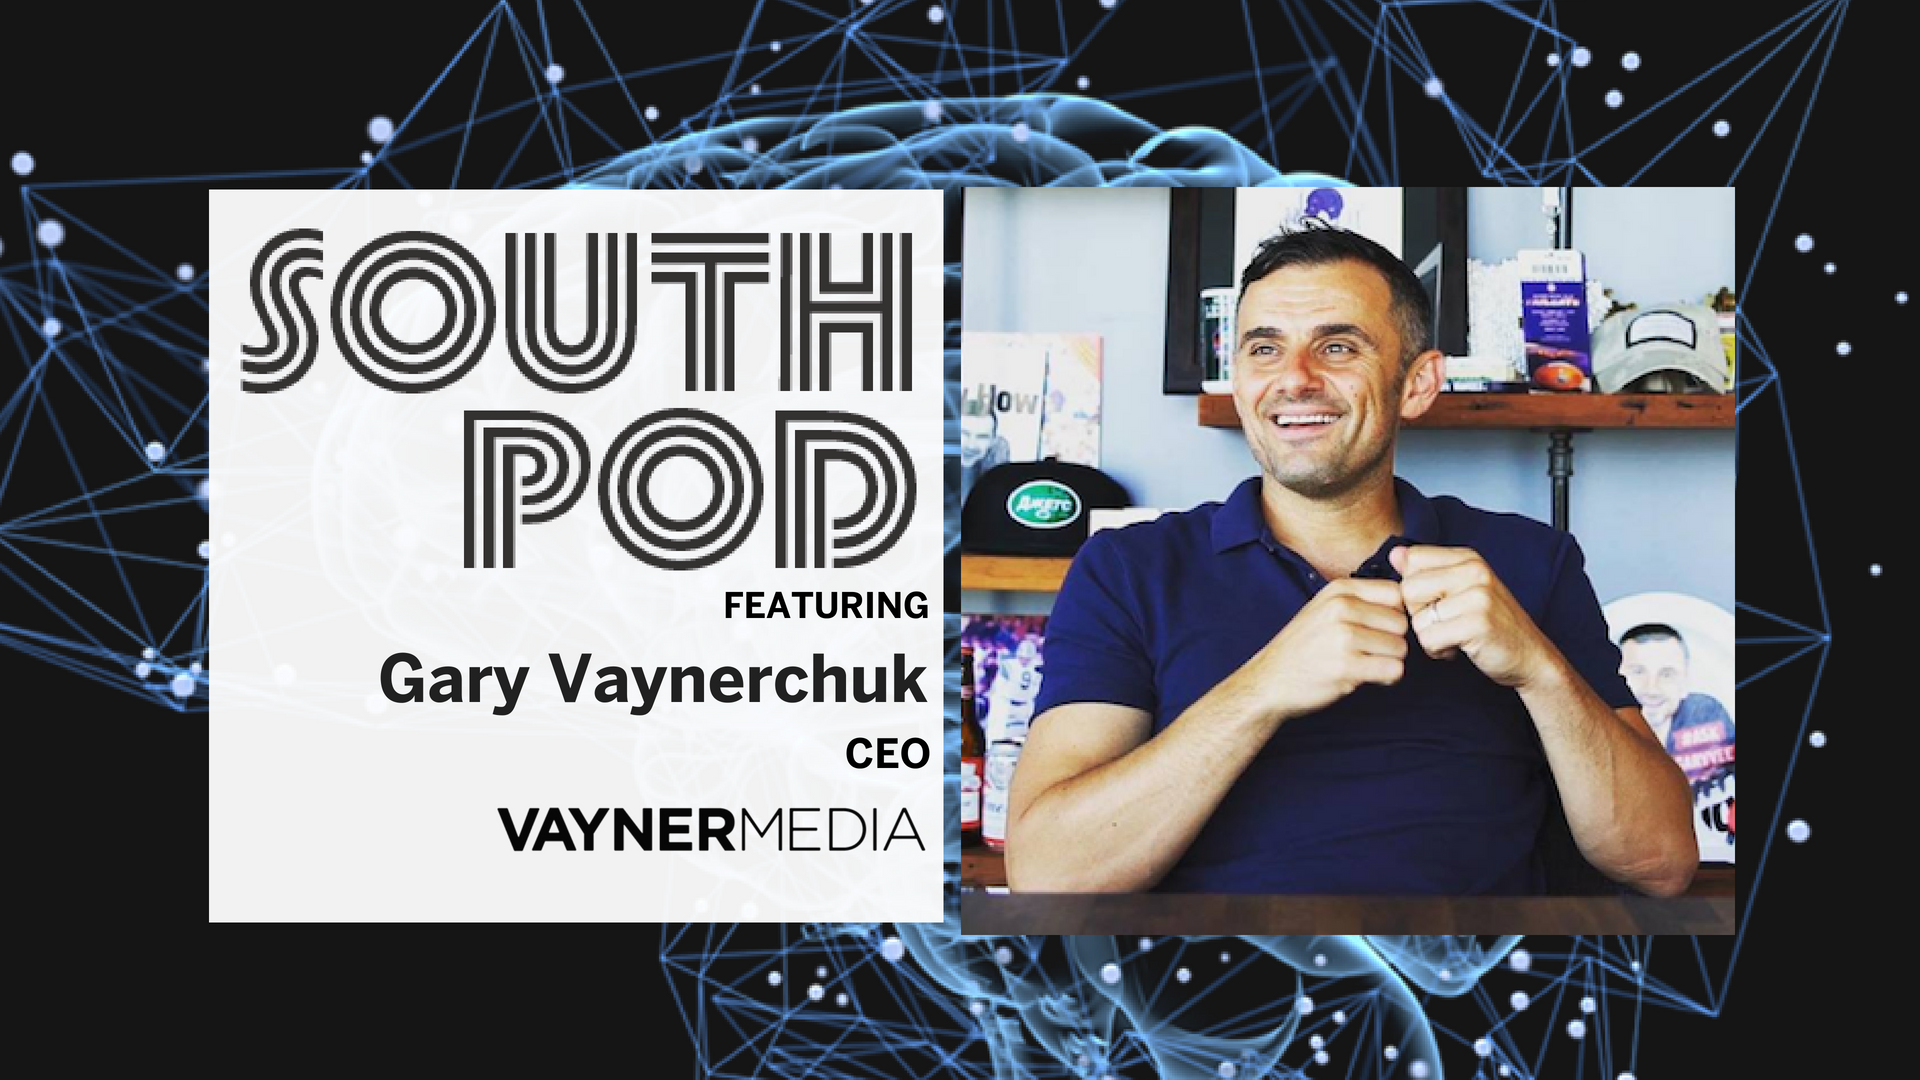 Gary Vaynerchuk Explains How to Get His Attention